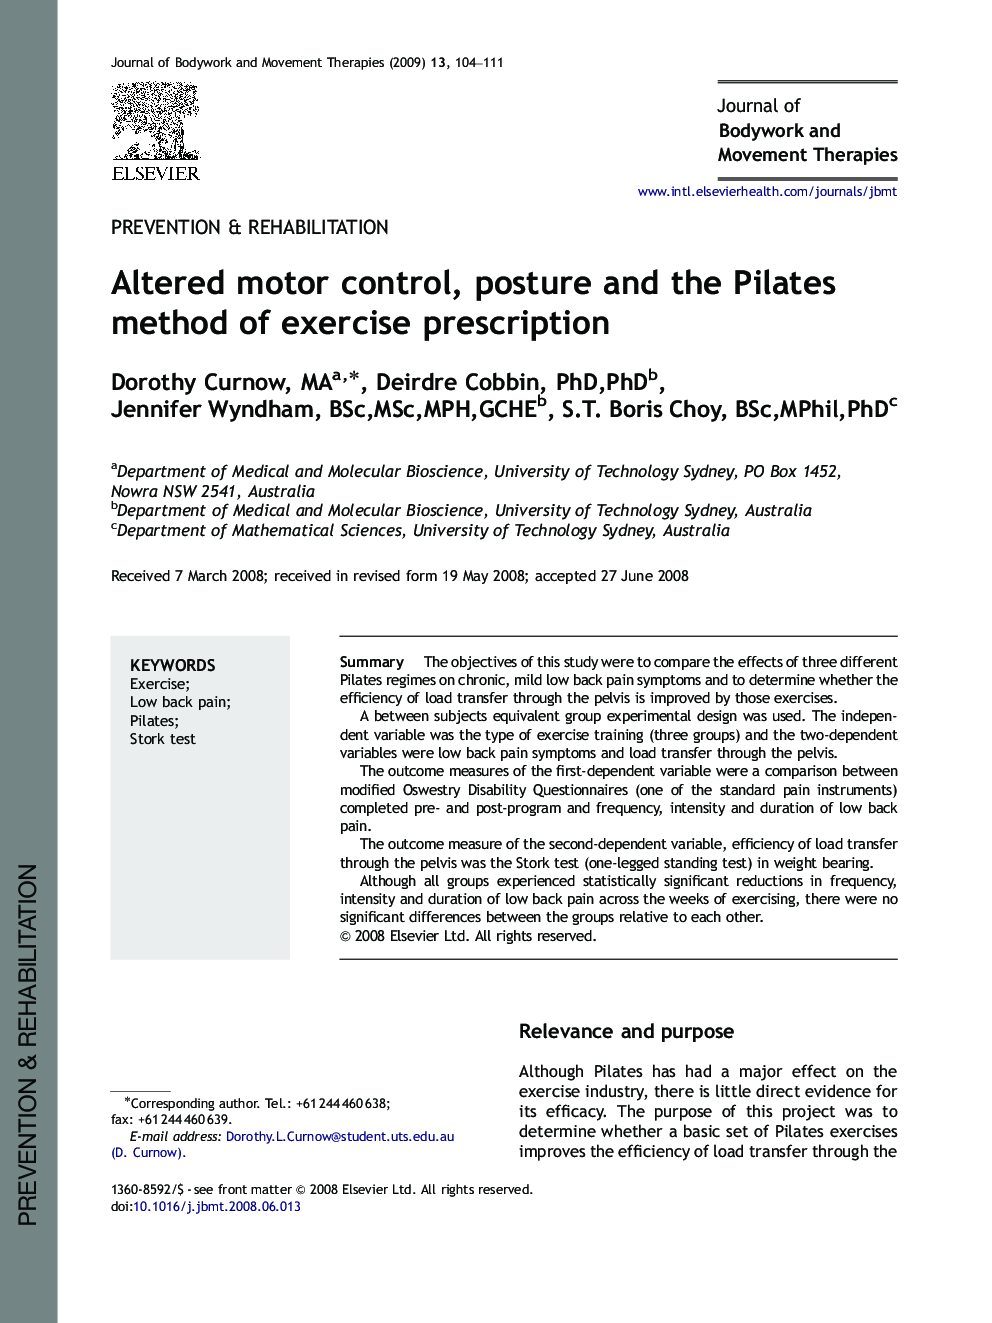 Altered motor control, posture and the Pilates method of exercise prescription